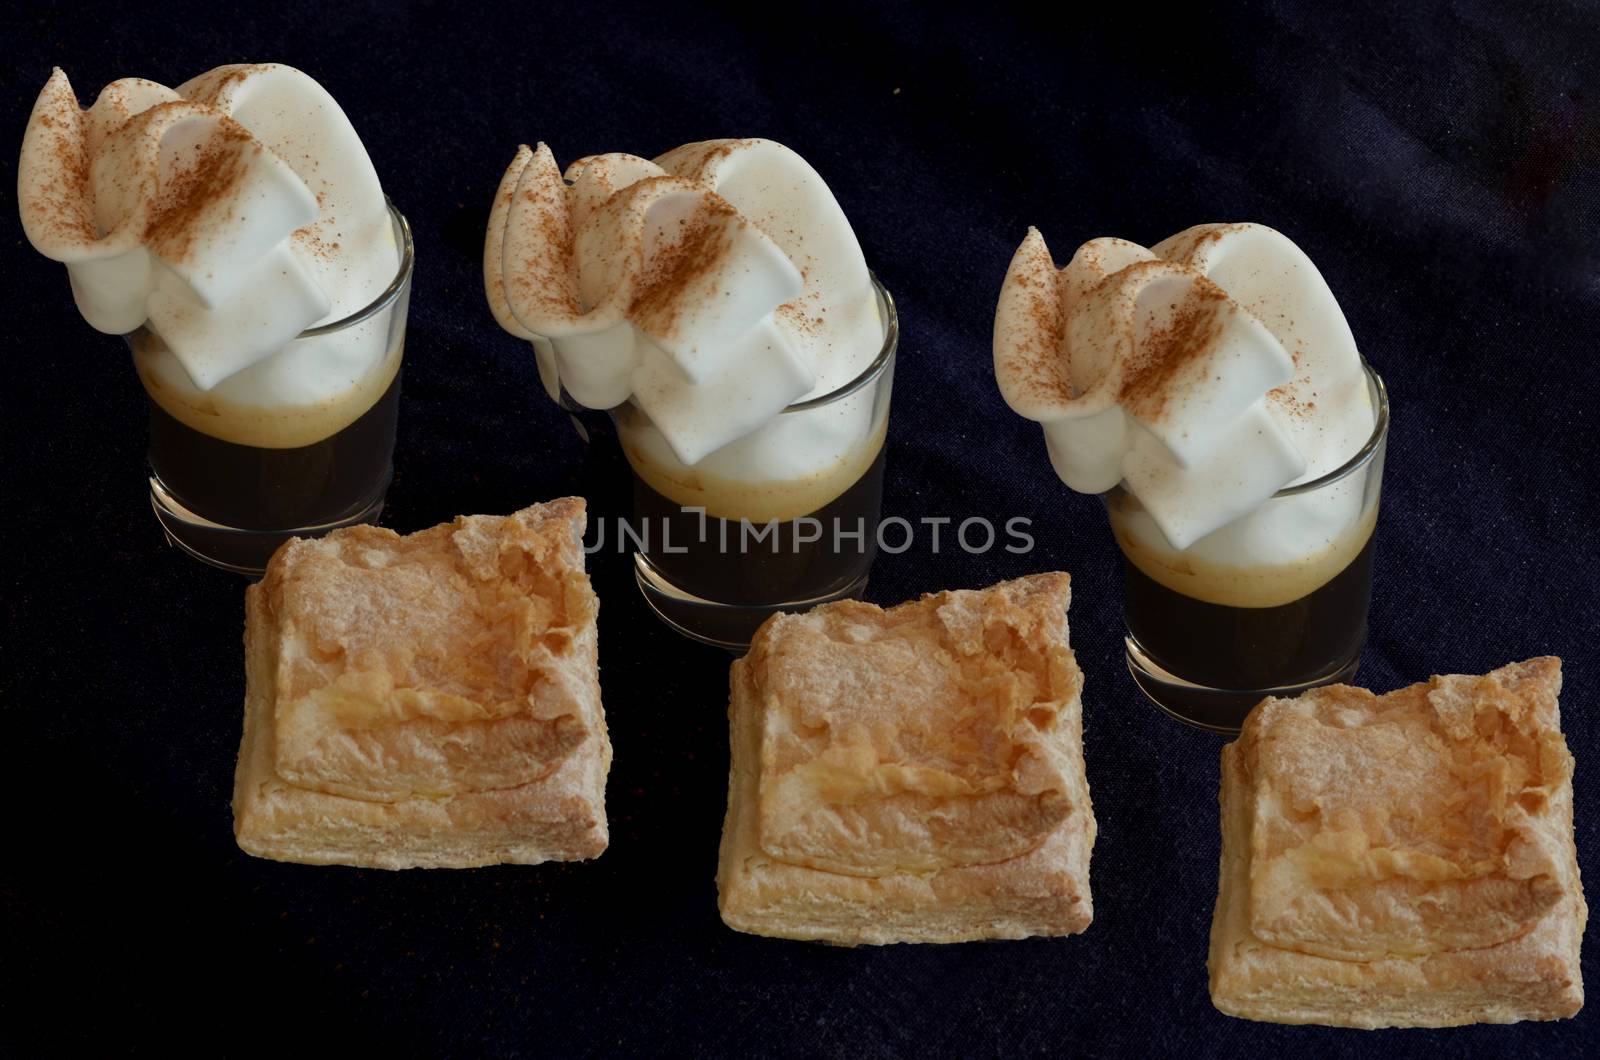 Three cups of coffee with cream and pastries typical of Castilla La Mancha